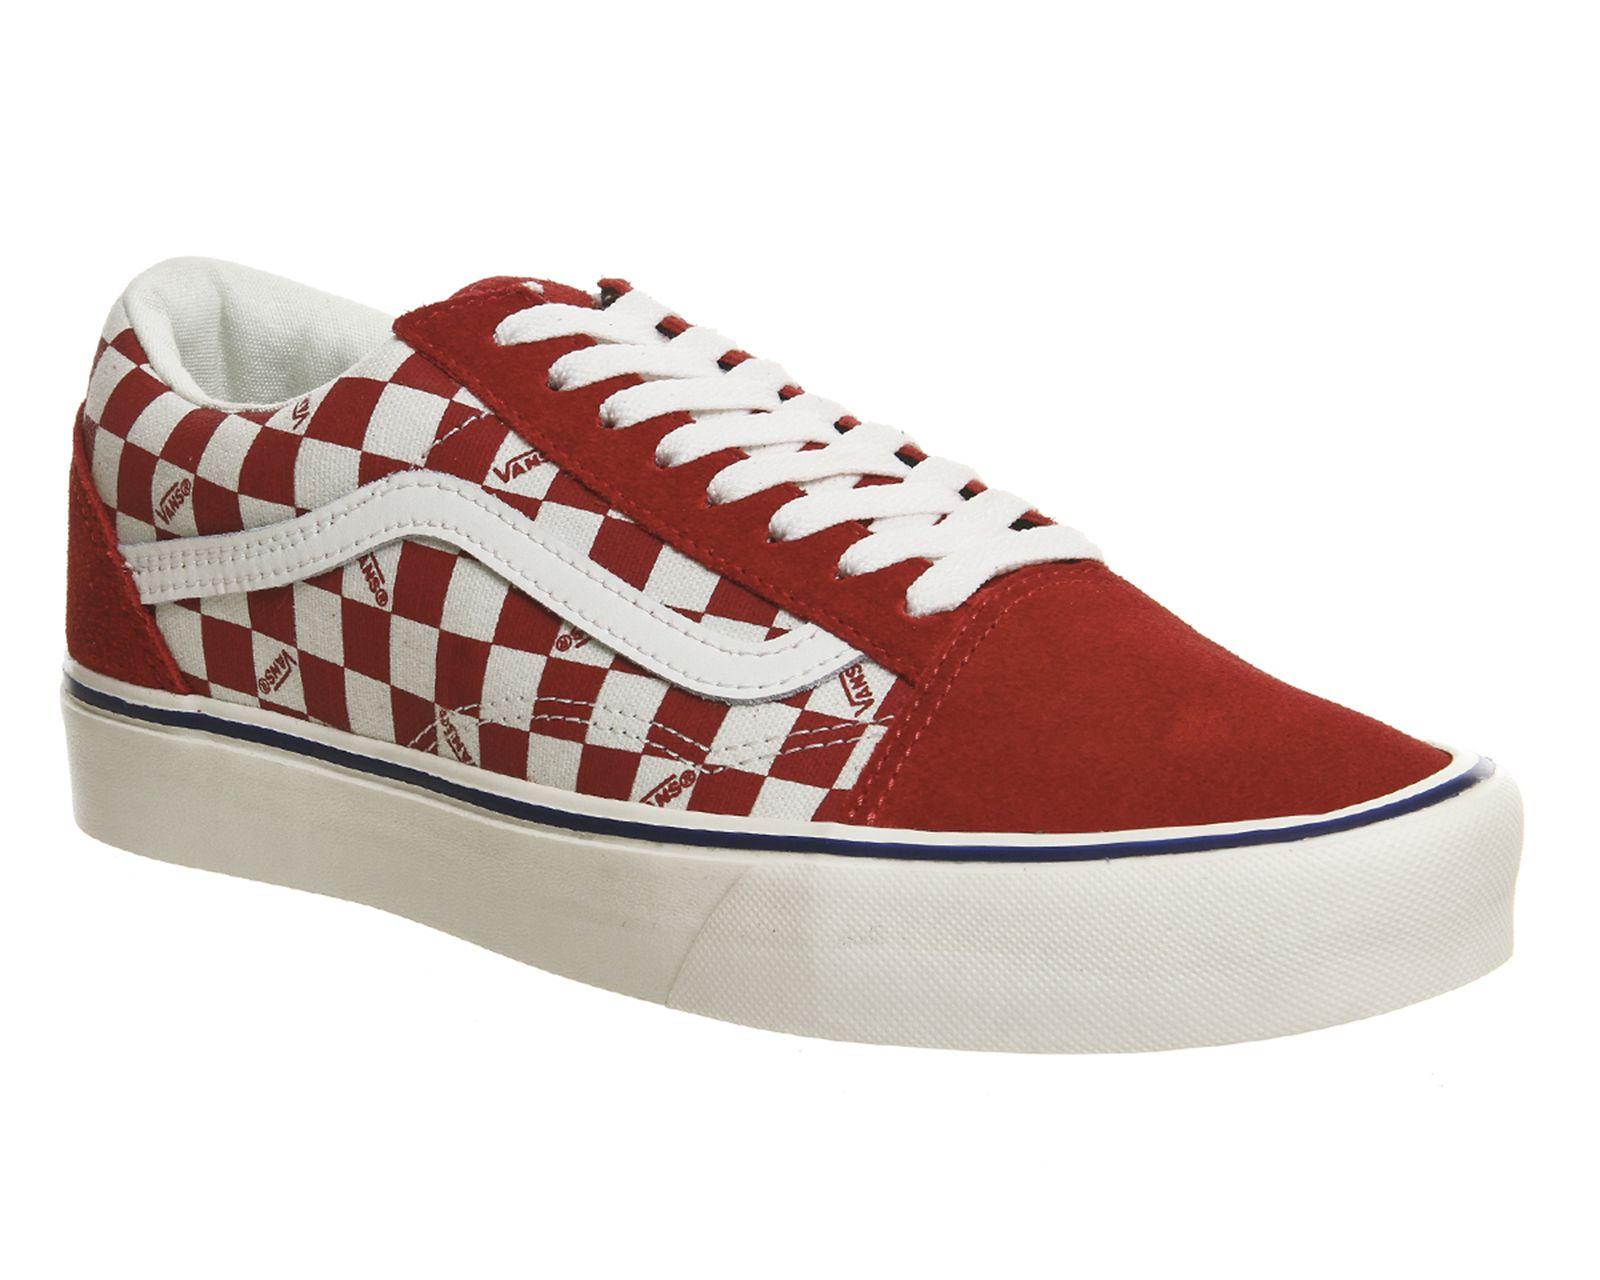 Red Checkered Vans Logo - Vans Old Skool Lite Plus Seeing Checker Red White - His trainers